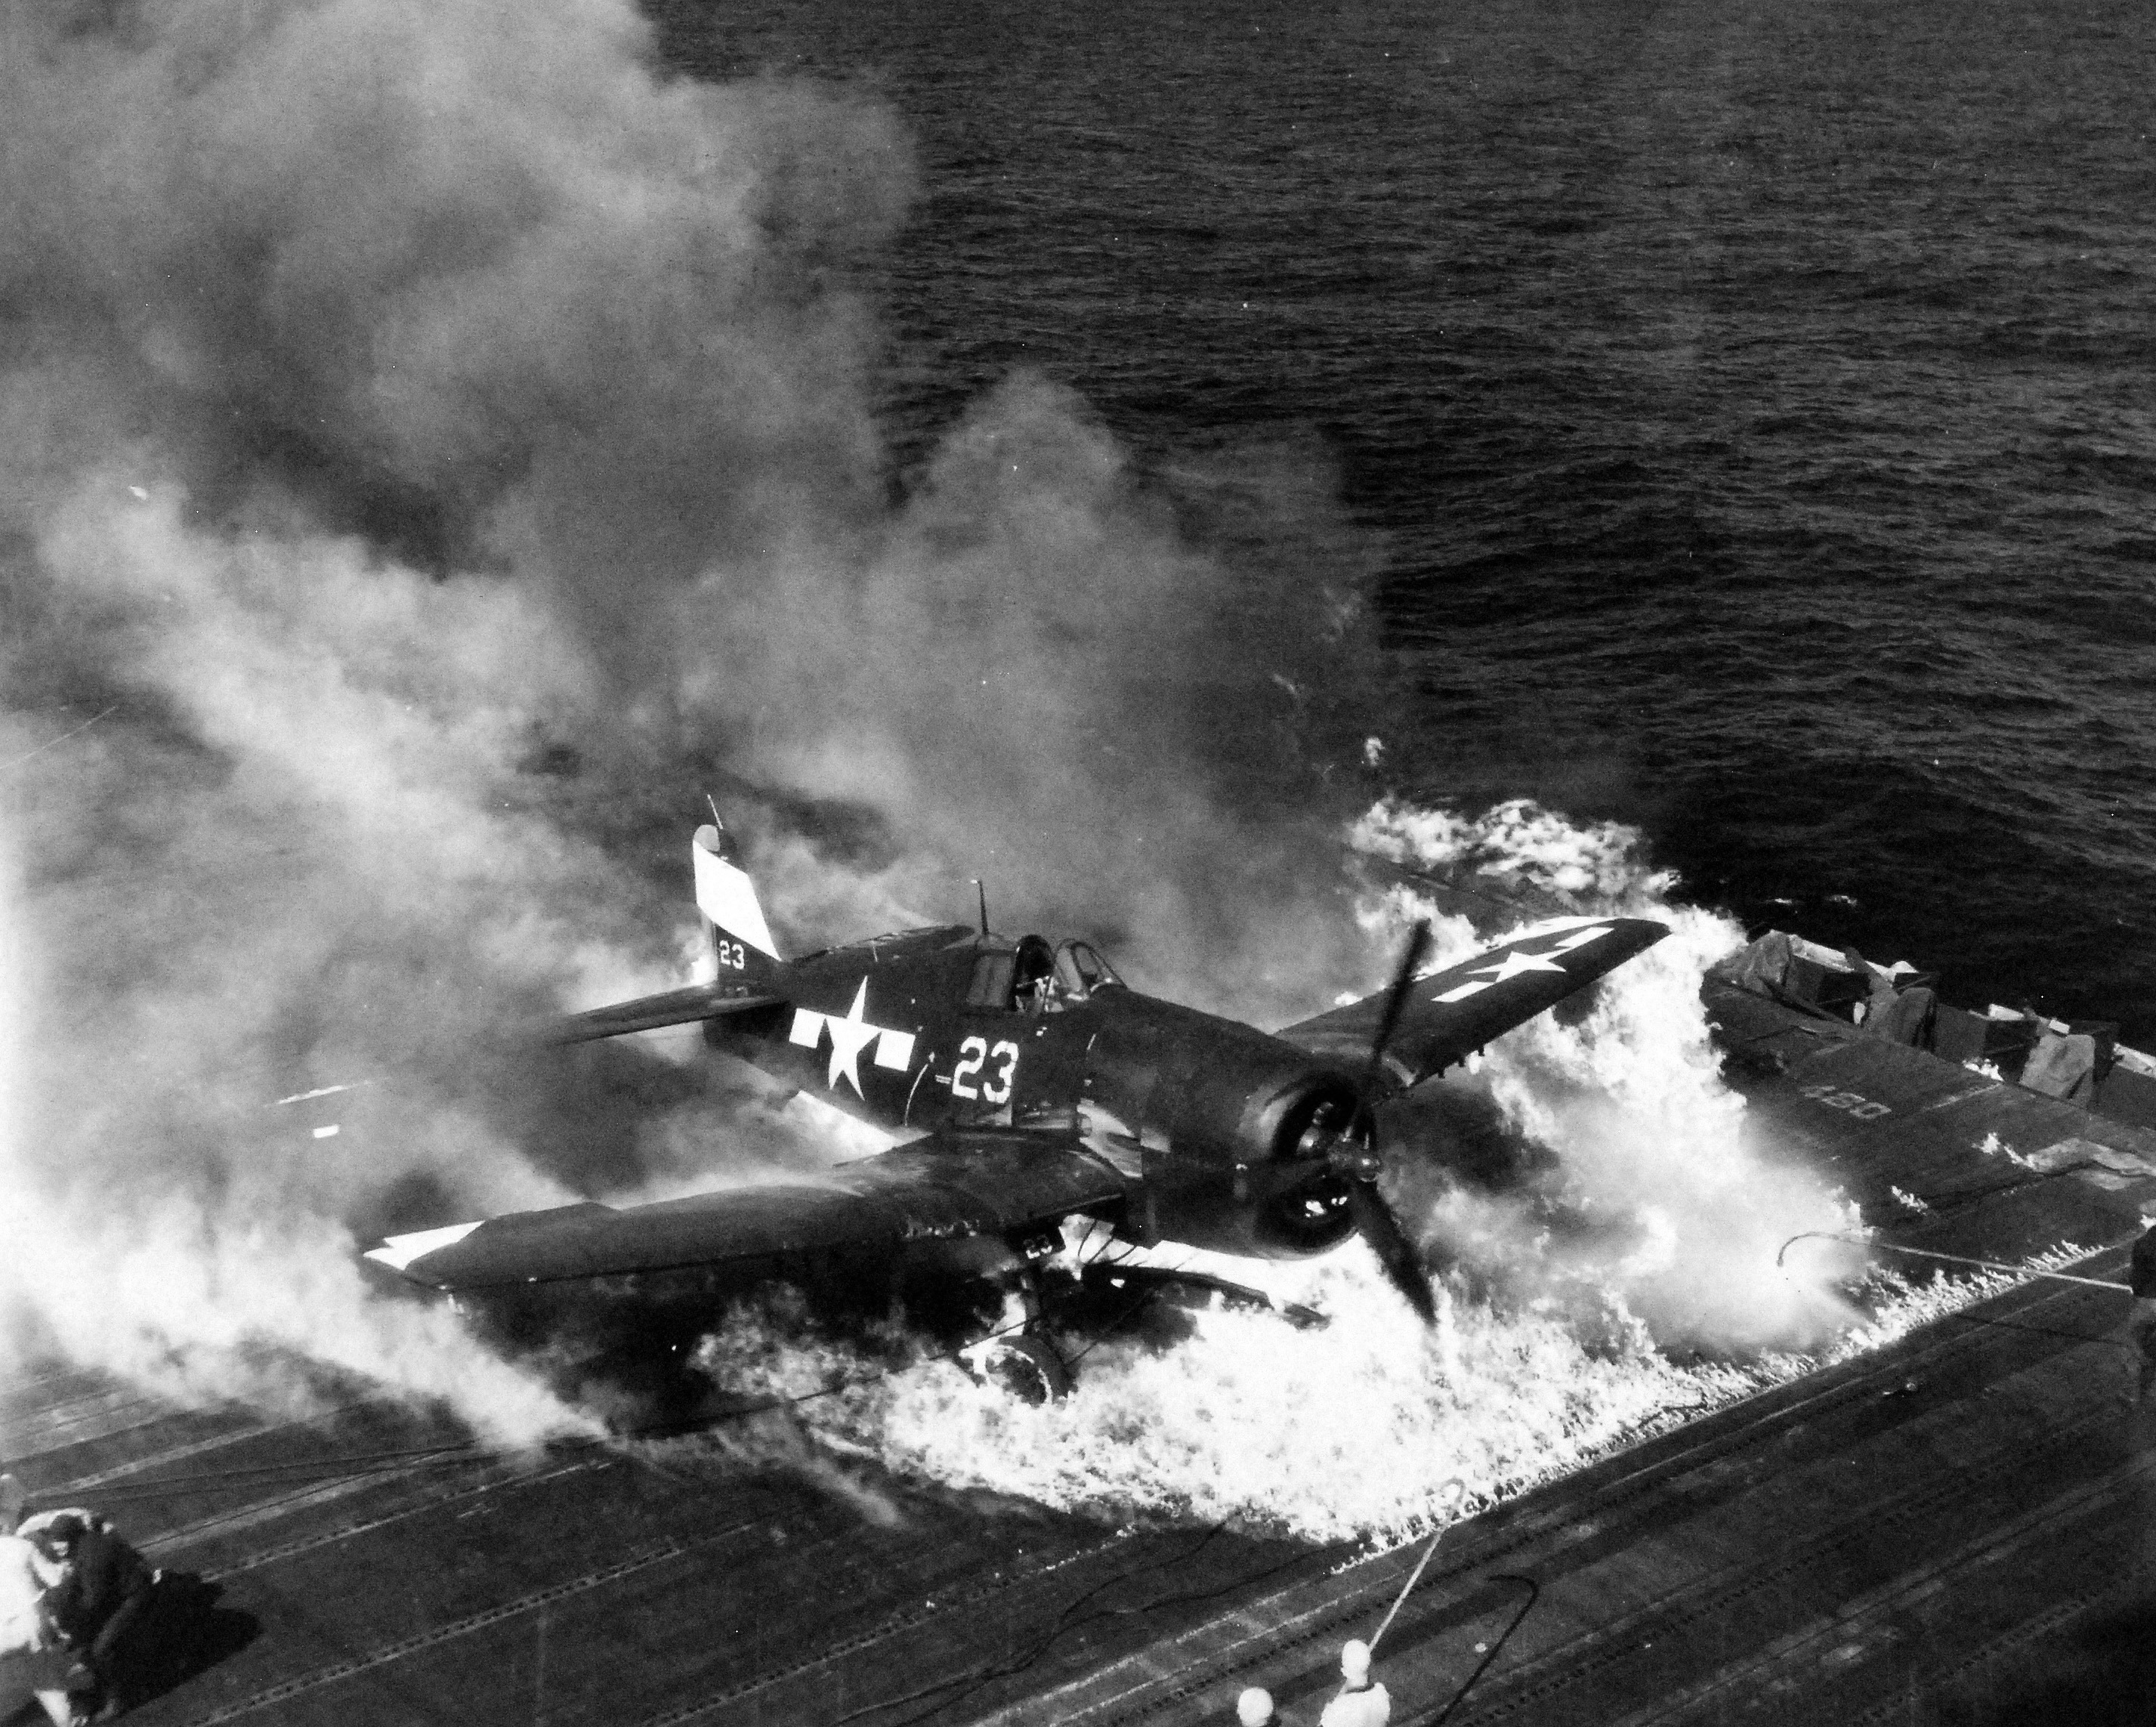 Ensign Ardon R. Ives of Fighting-Bombing Squadron VBF-9 crashed his F6F-5 Hellcat through the barrier on USS Lexington (Essex-class) and ruptured the center-line fuel tank, Feb 1945, western Pacific. Photo 7 of 7